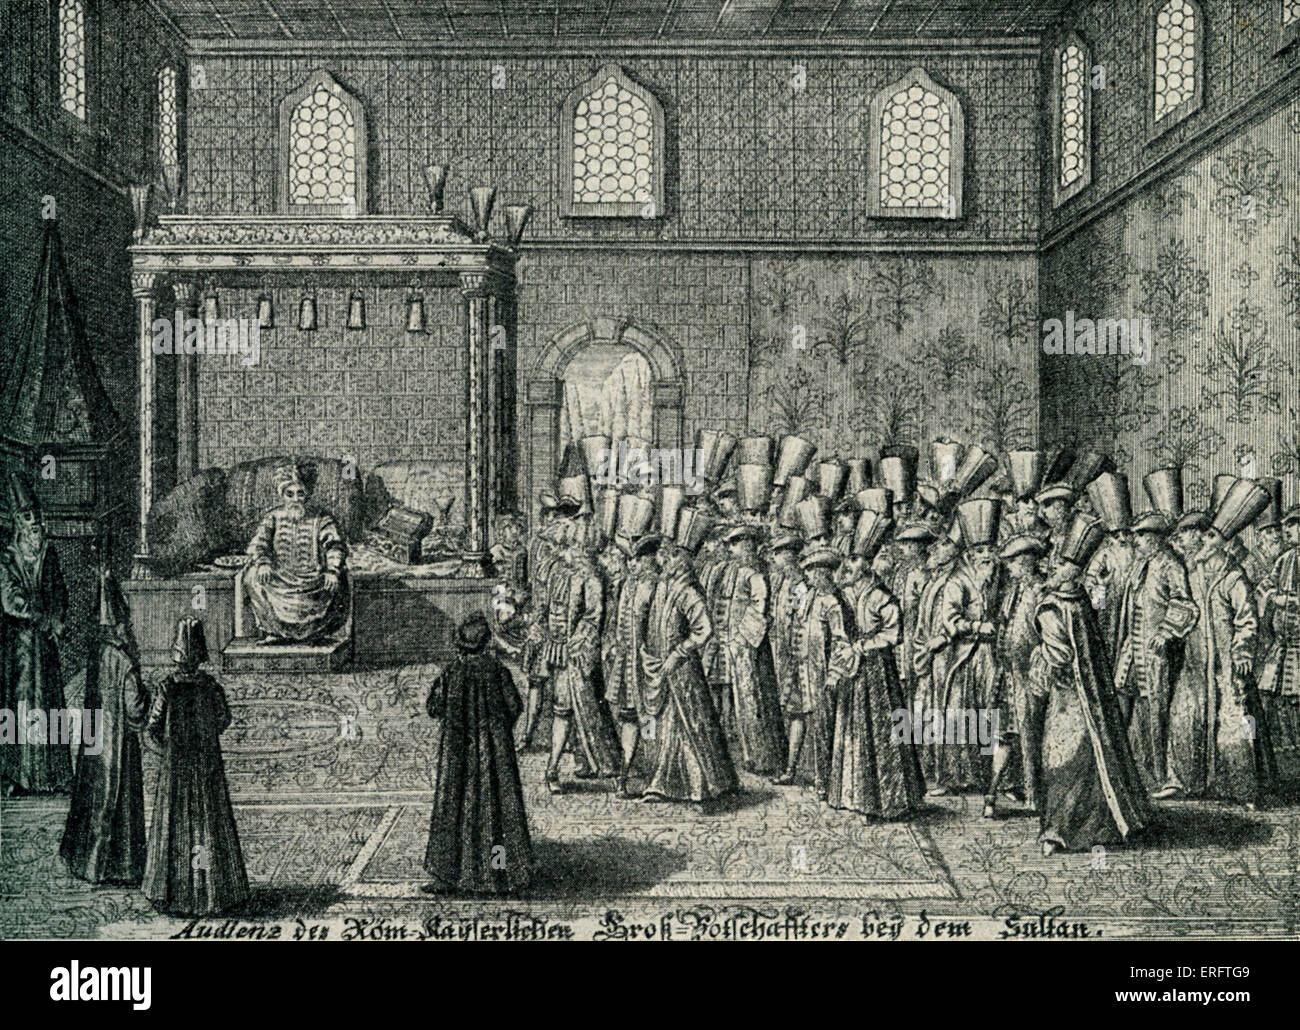 Imperial legation at an audience with the Sultan - from 'Kayserliche Großbotschaft', Nuremberg, 1723. Stock Photo